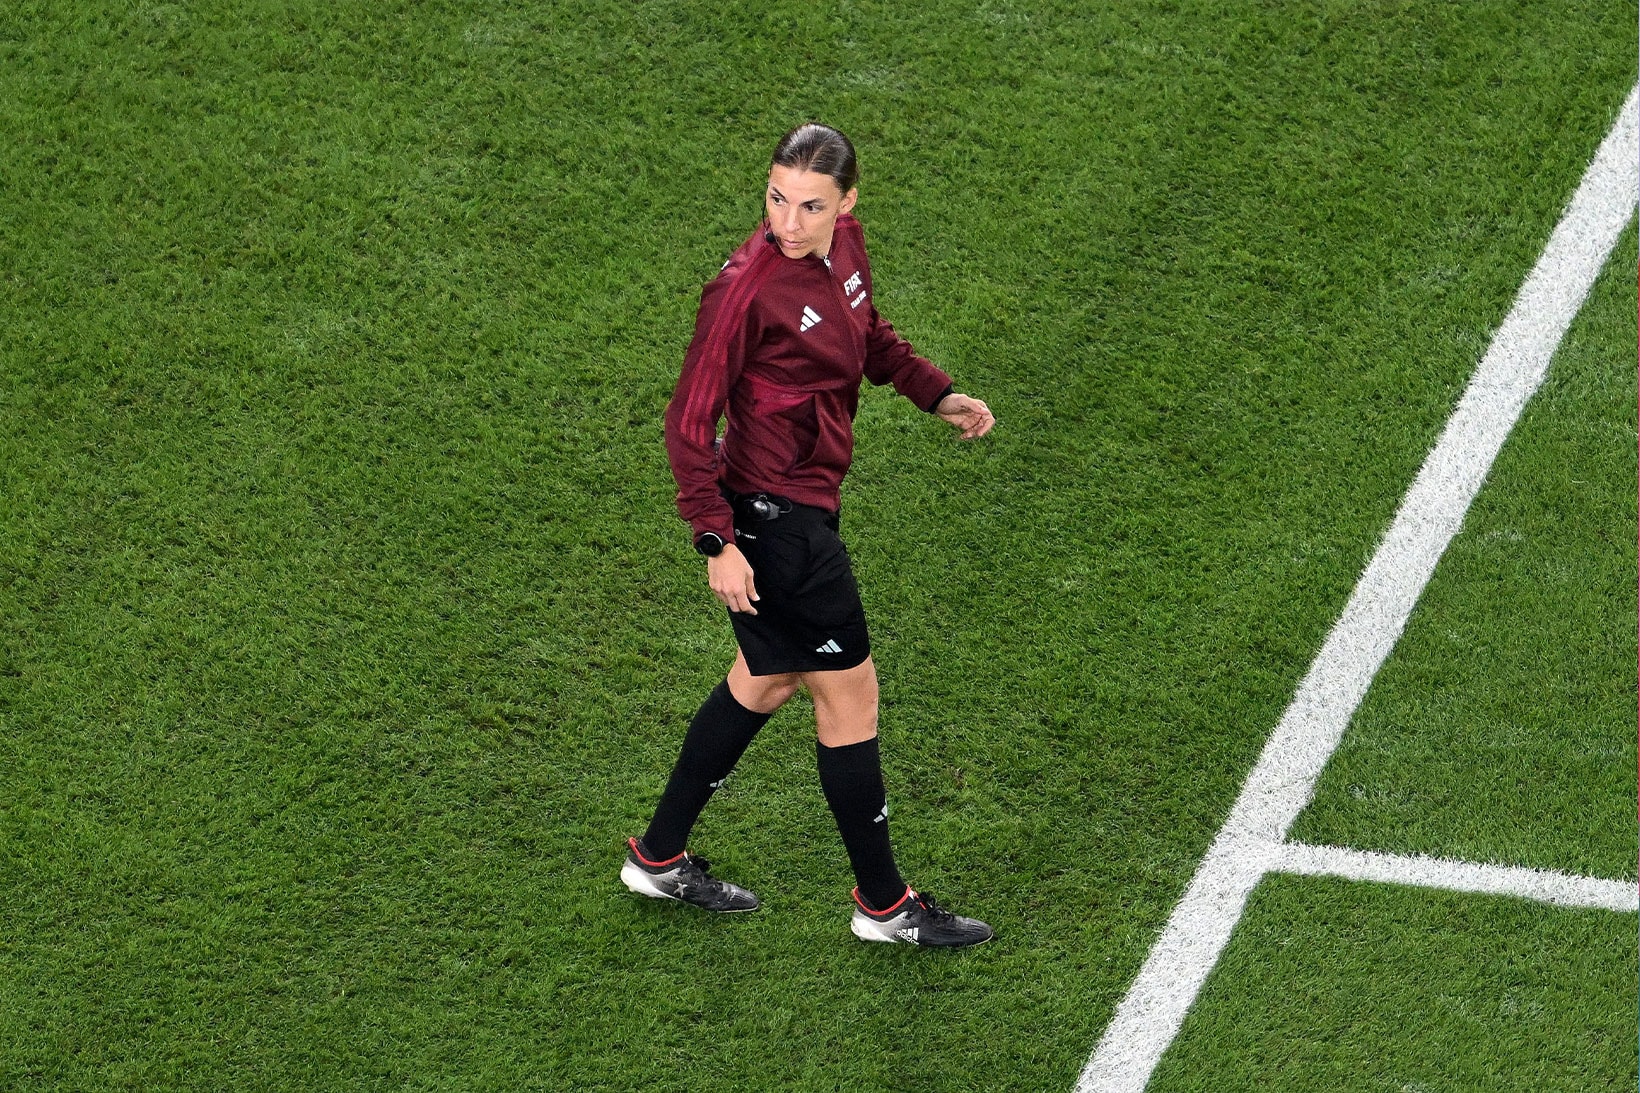 Stéphanie Frappart, First Female Referee at Men's World Cup Game FIFA Costa Rica Germany Info